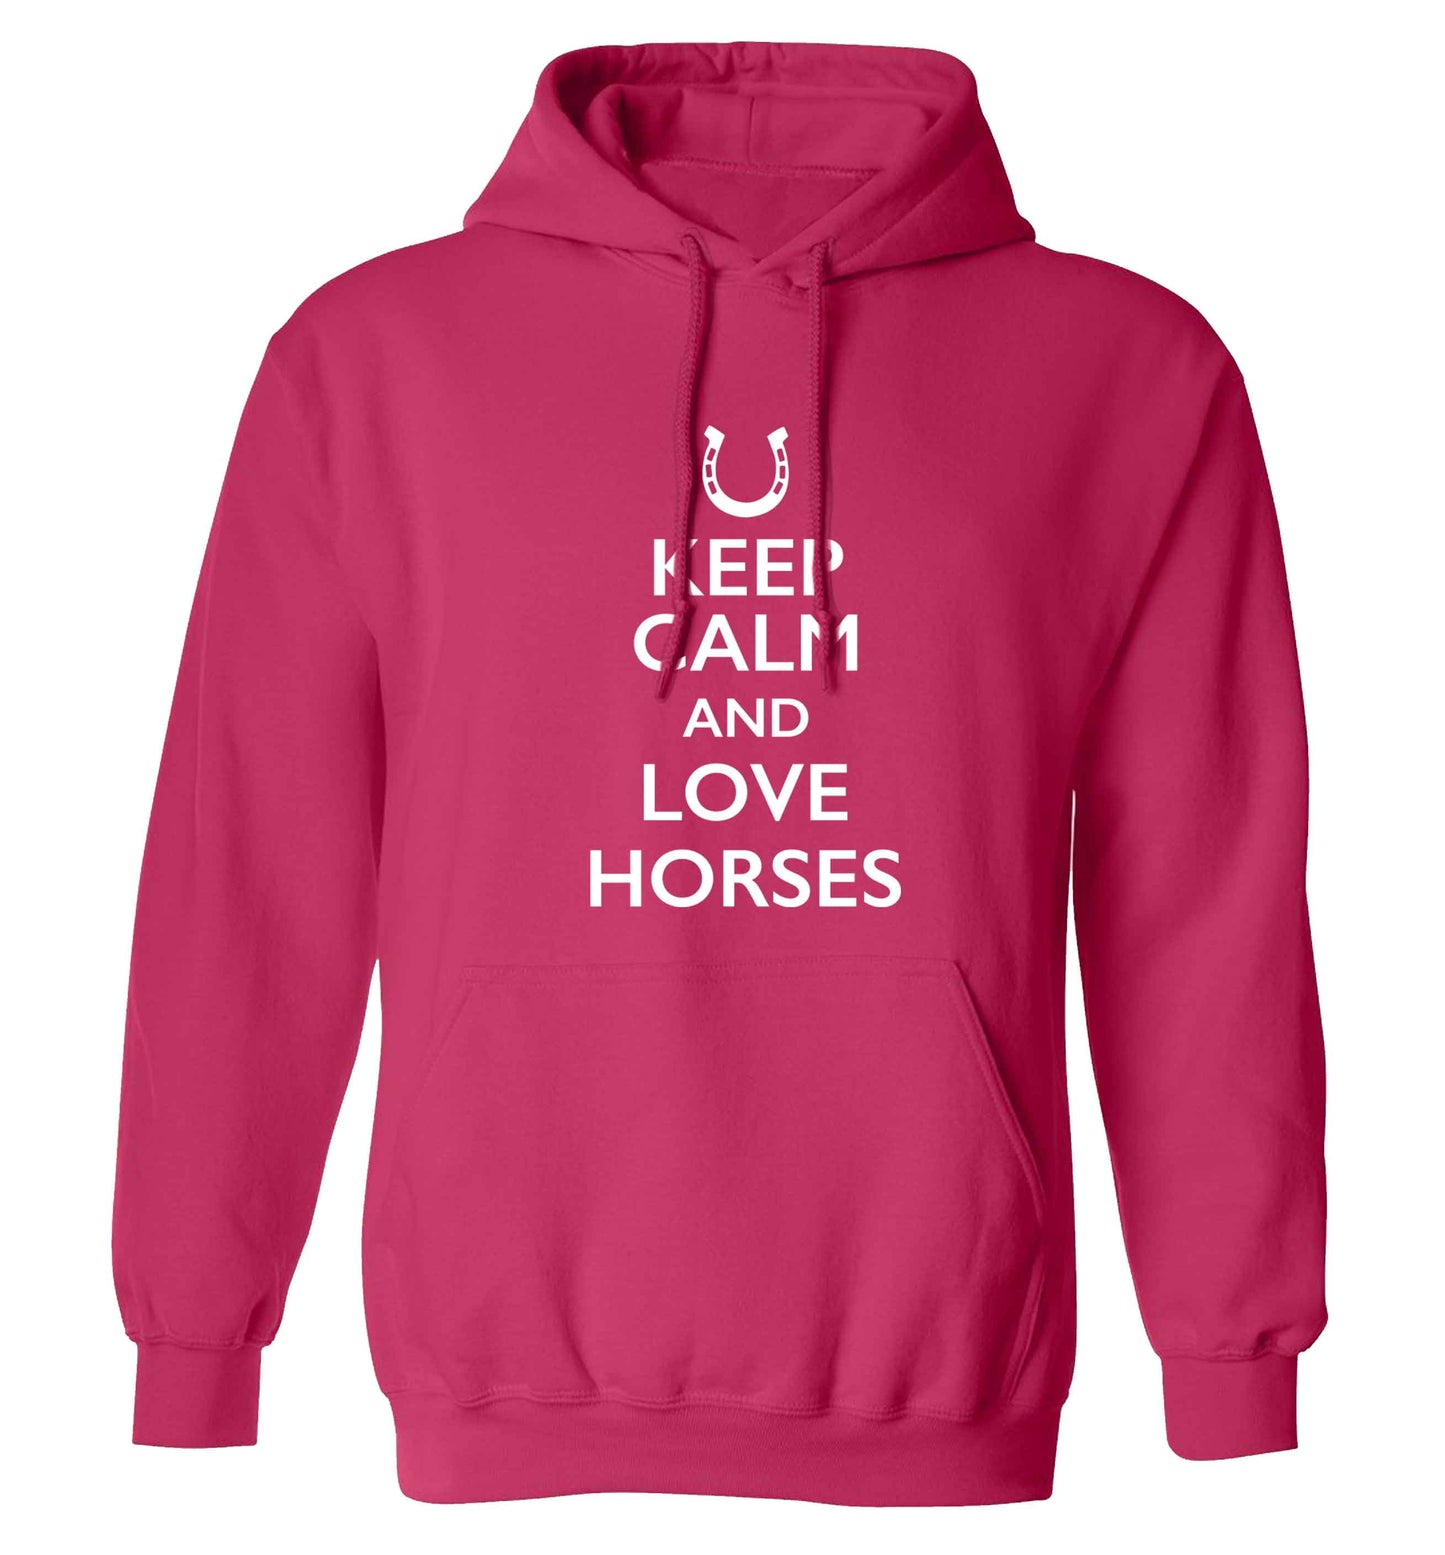 Keep calm and love horses adults unisex pink hoodie 2XL